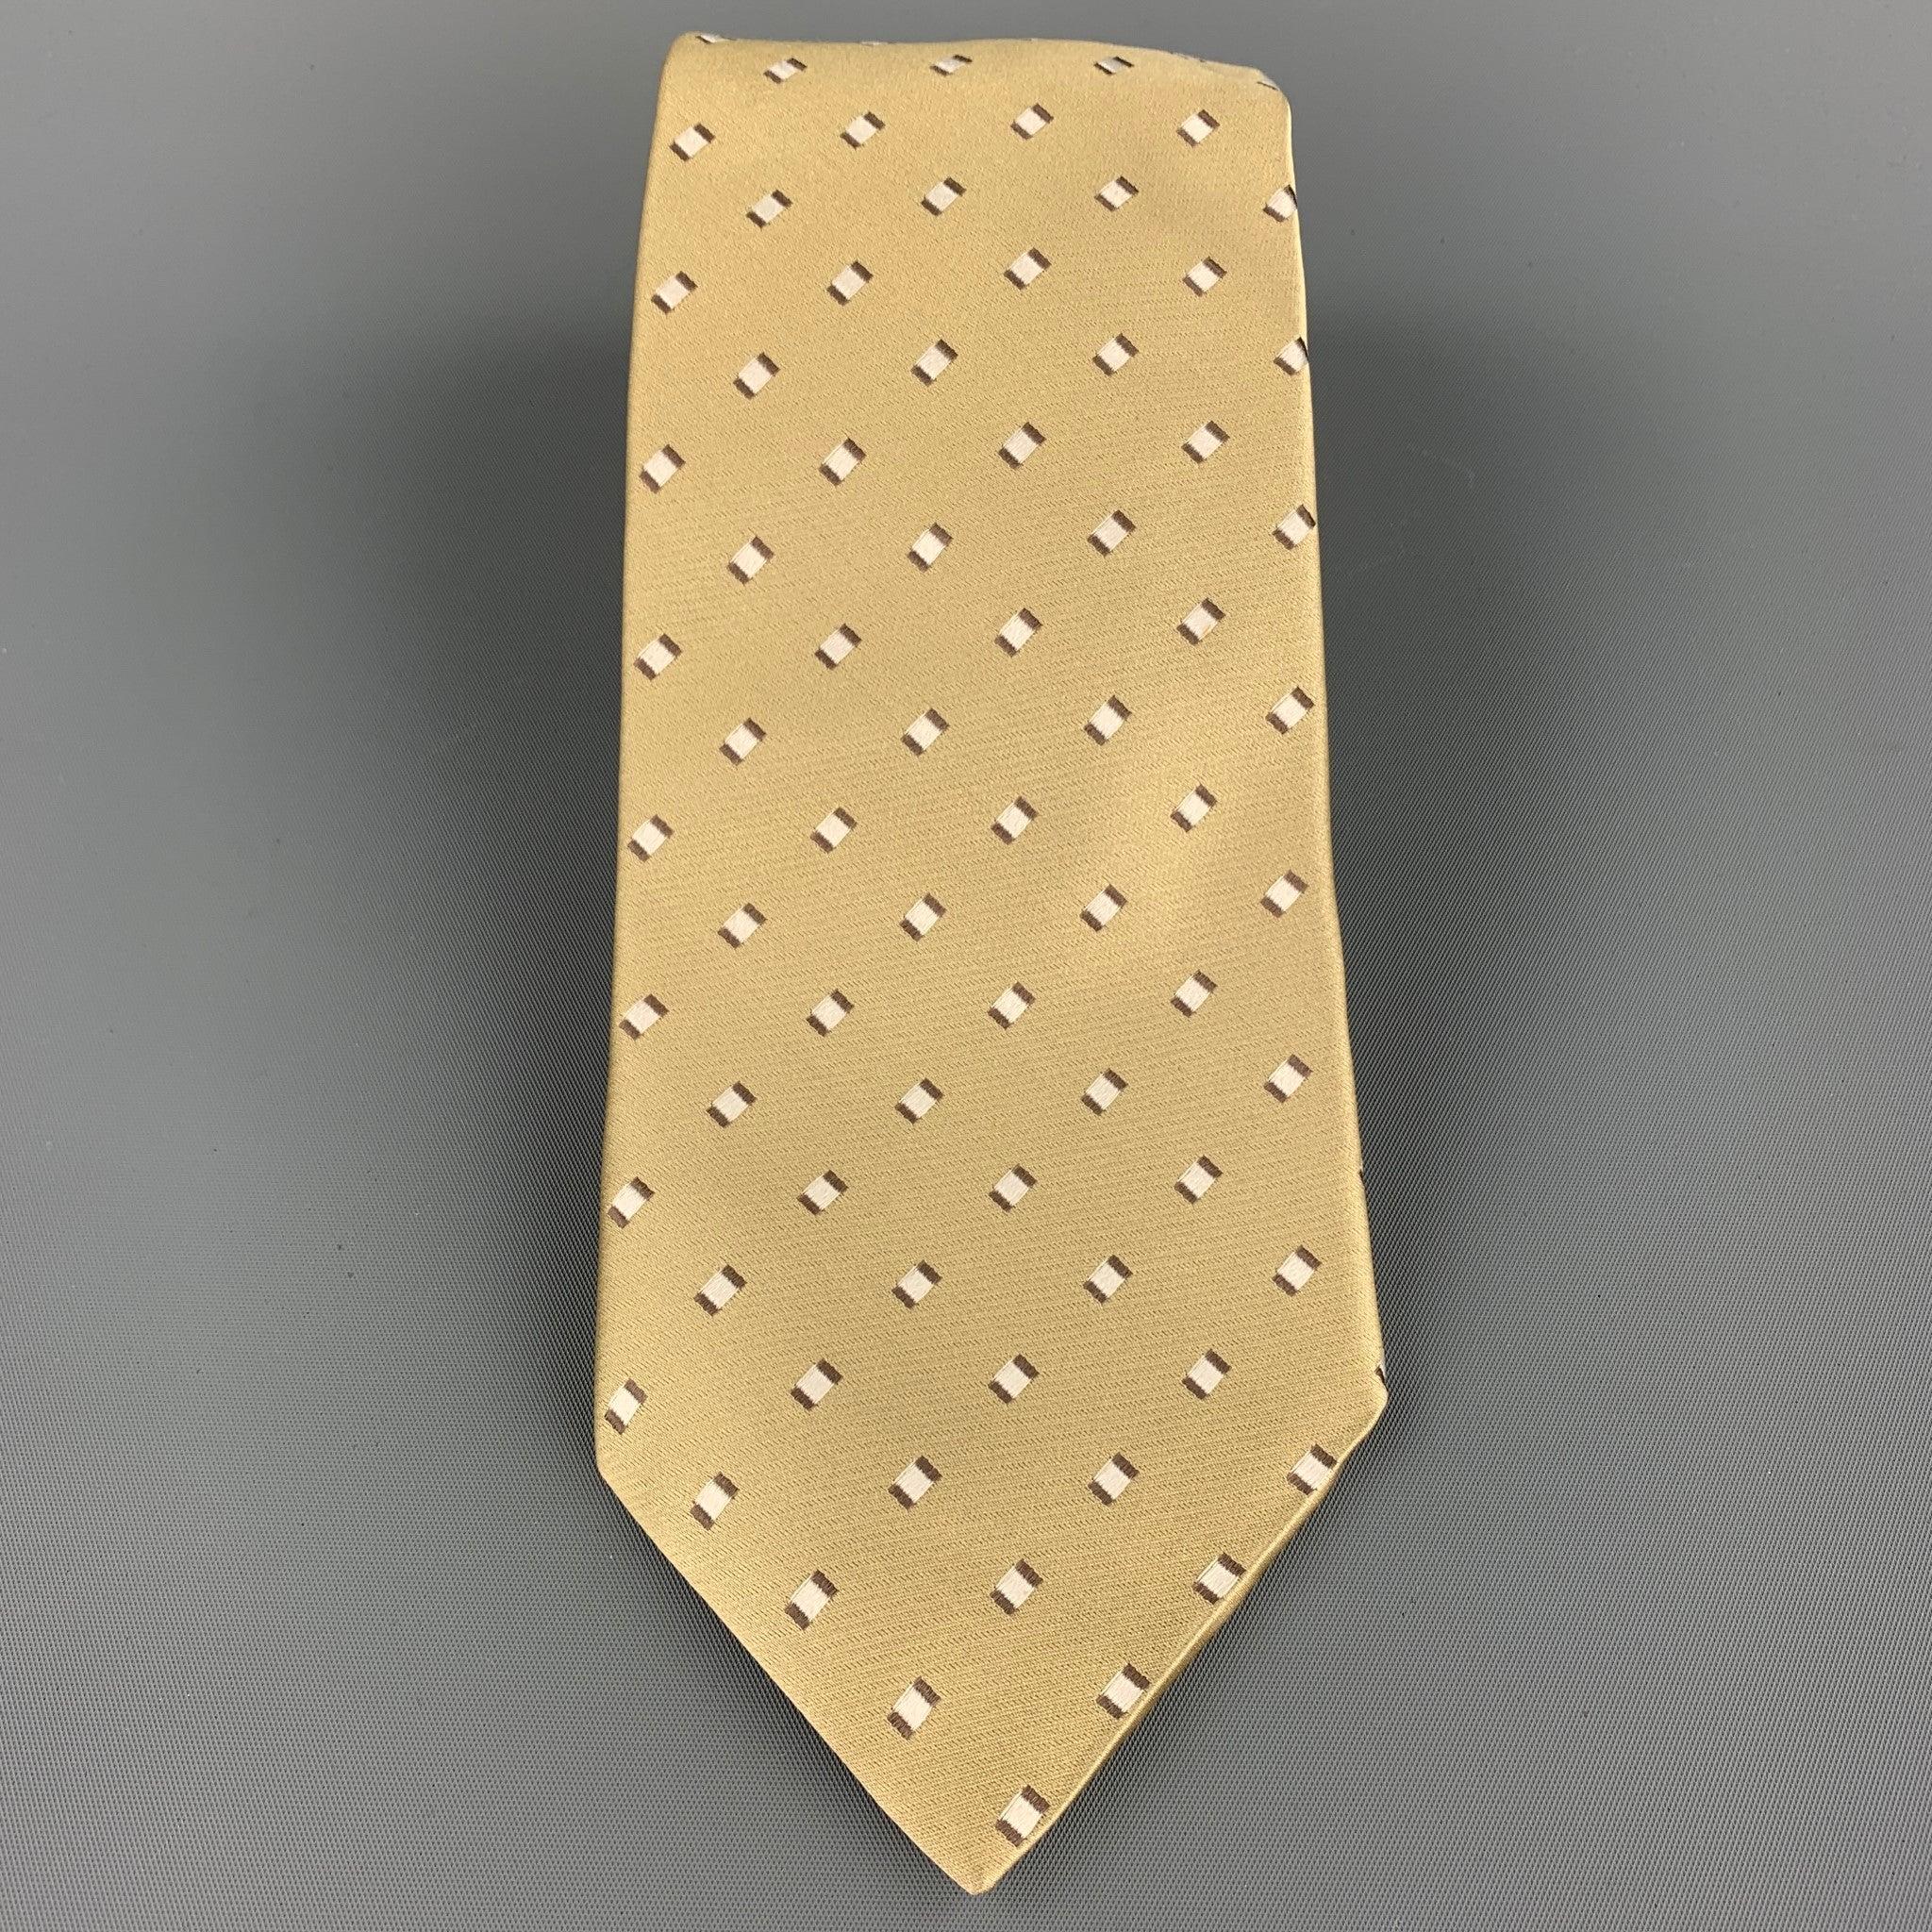 ERMENEGILDO ZEGNA tie comes in a gold square print silk. Made in Italy.Very Good Pre-Owned Condition.Width: 4 inches  
  
  
  
 Sui Generis Reference: 107883
 Category: Tie
 More Details
  
 Brand: ERMENEGILDO ZEGNA
 Color: Gold
 Pattern: Squares
